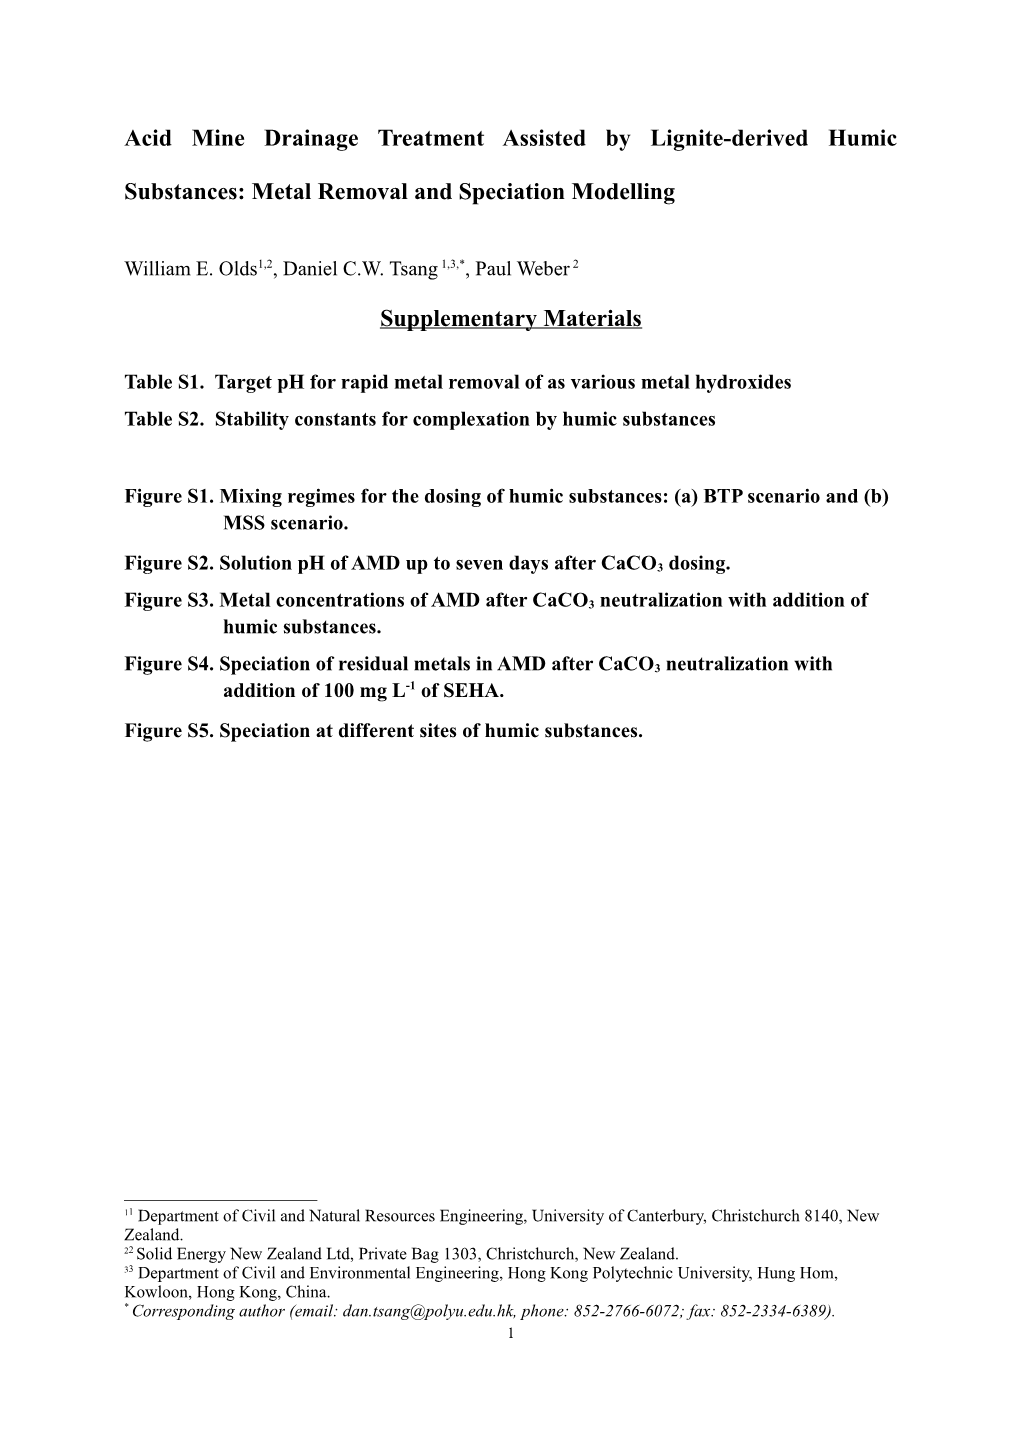 Table S1. Target Ph for Rapid Metal Removal of As Various Metal Hydroxides